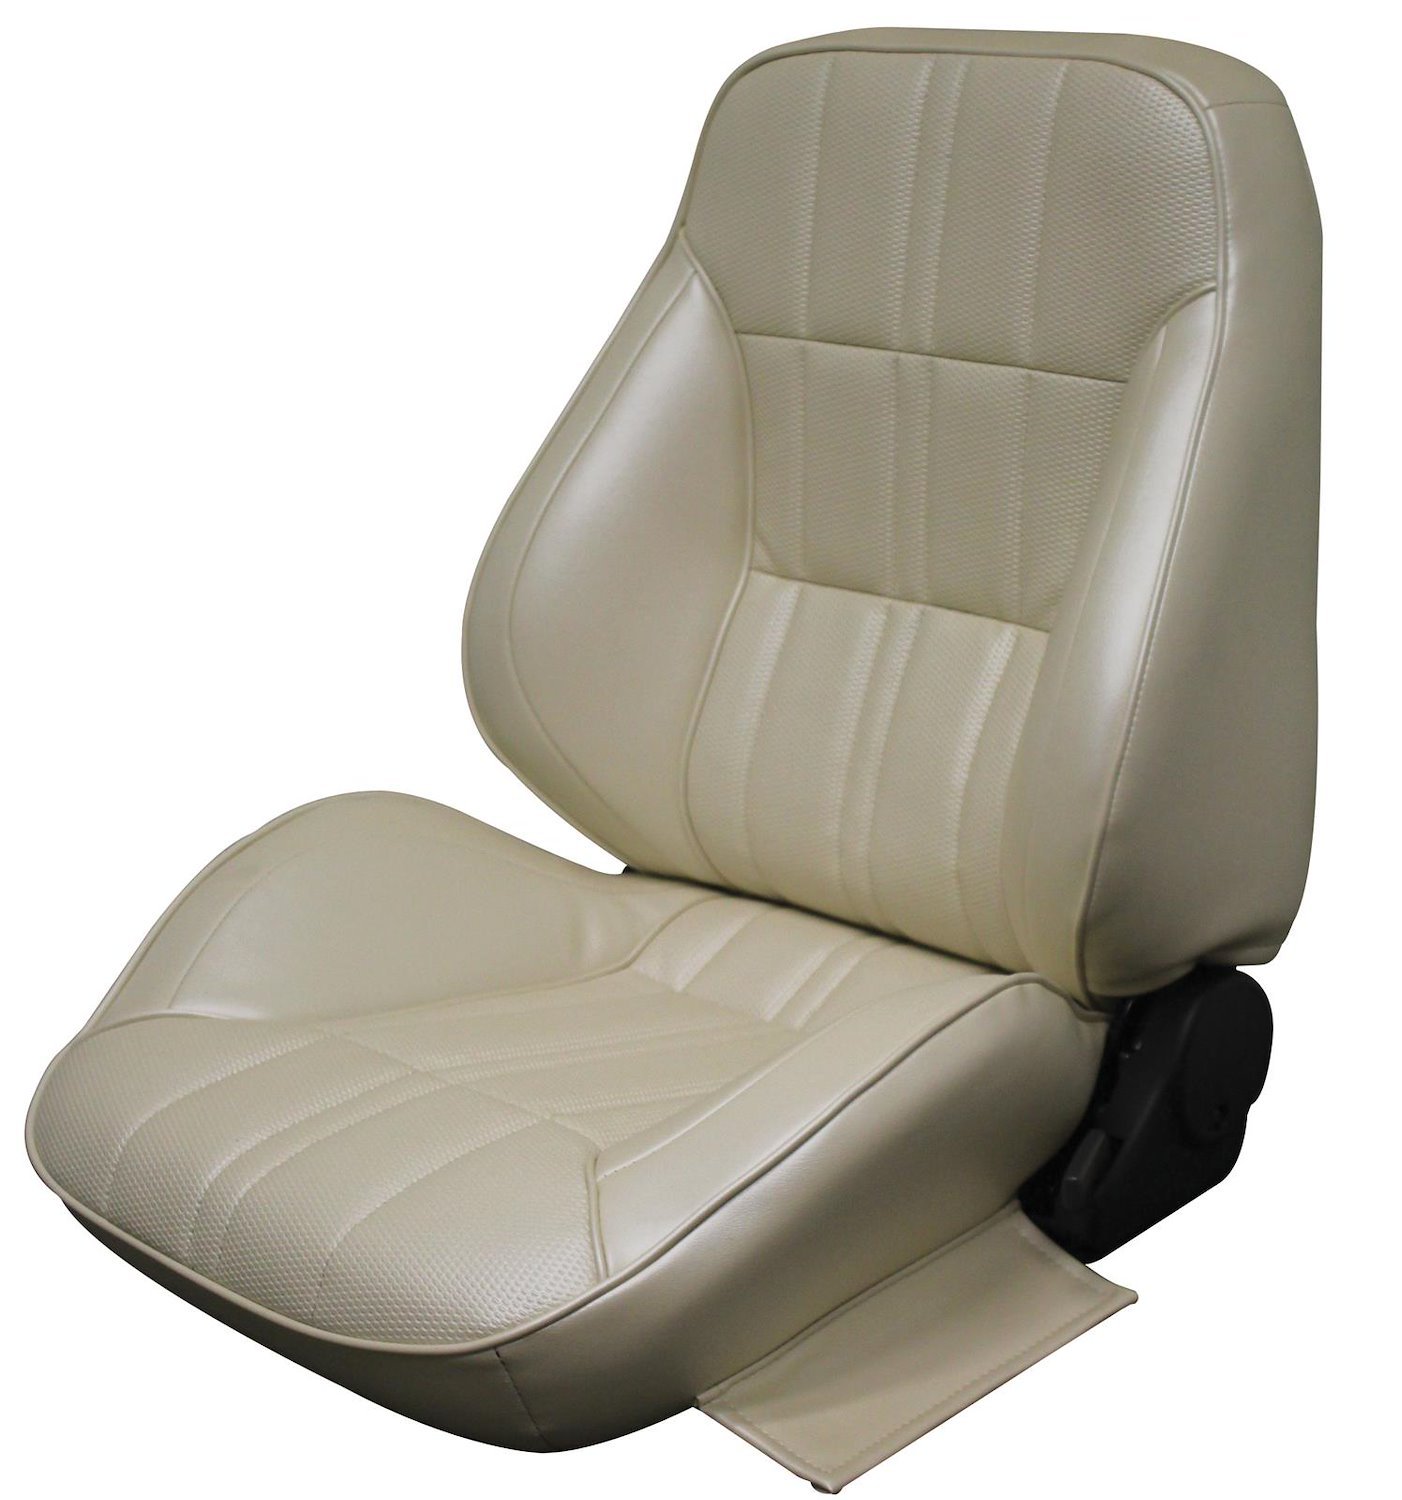 1971-1973 Ford Mustang Deluxe and Grande Interior Ginger Touring II Preassembled Reclining Front Bucket Seats